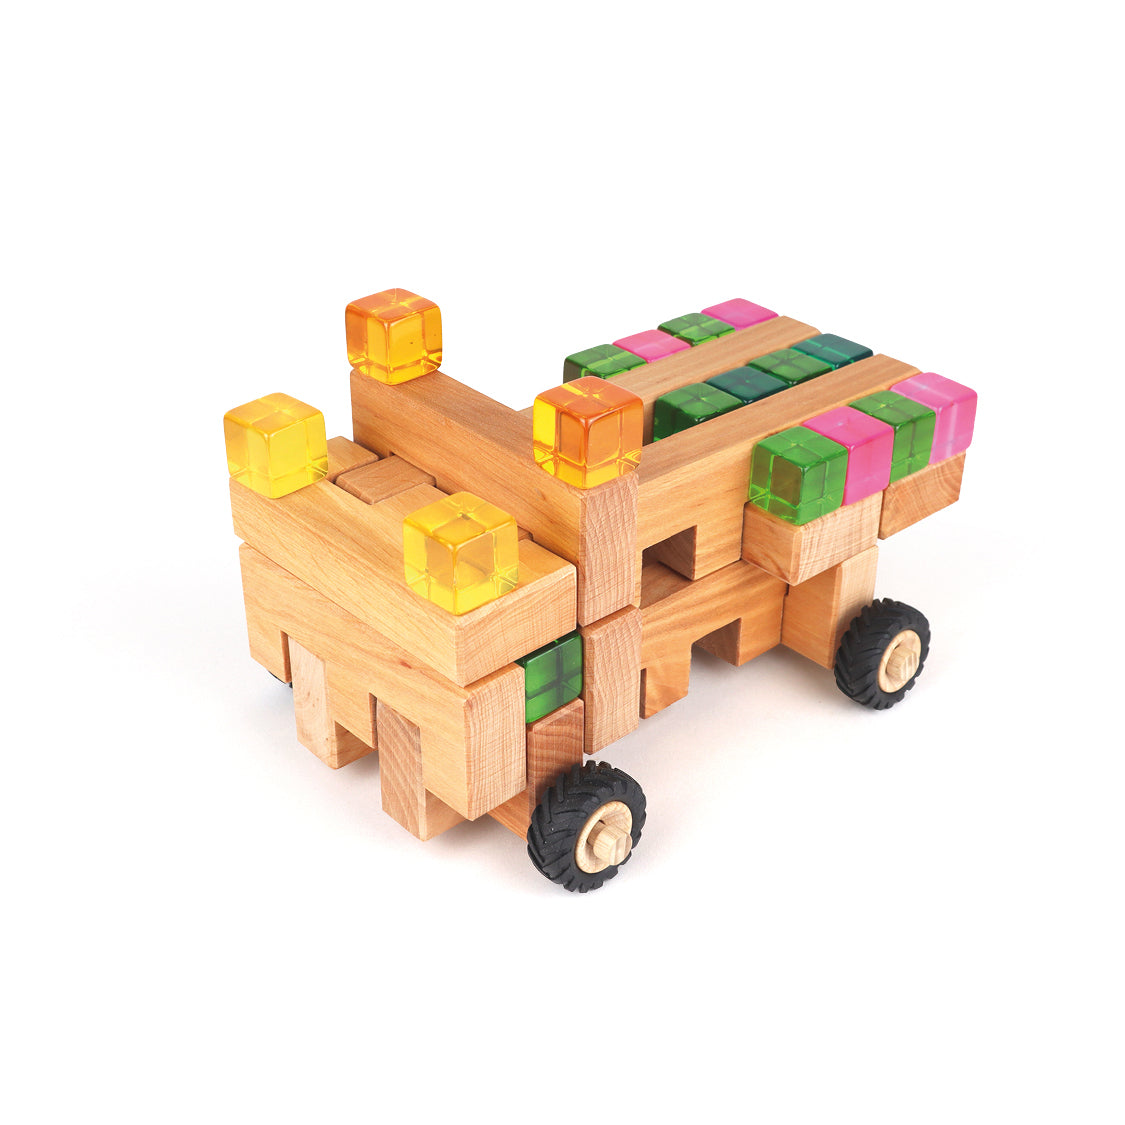 Bauspiel - Big Wheel Kit 30 pcs - Open ended block play. wooden blocks and wooden wheels with lucite cubes.